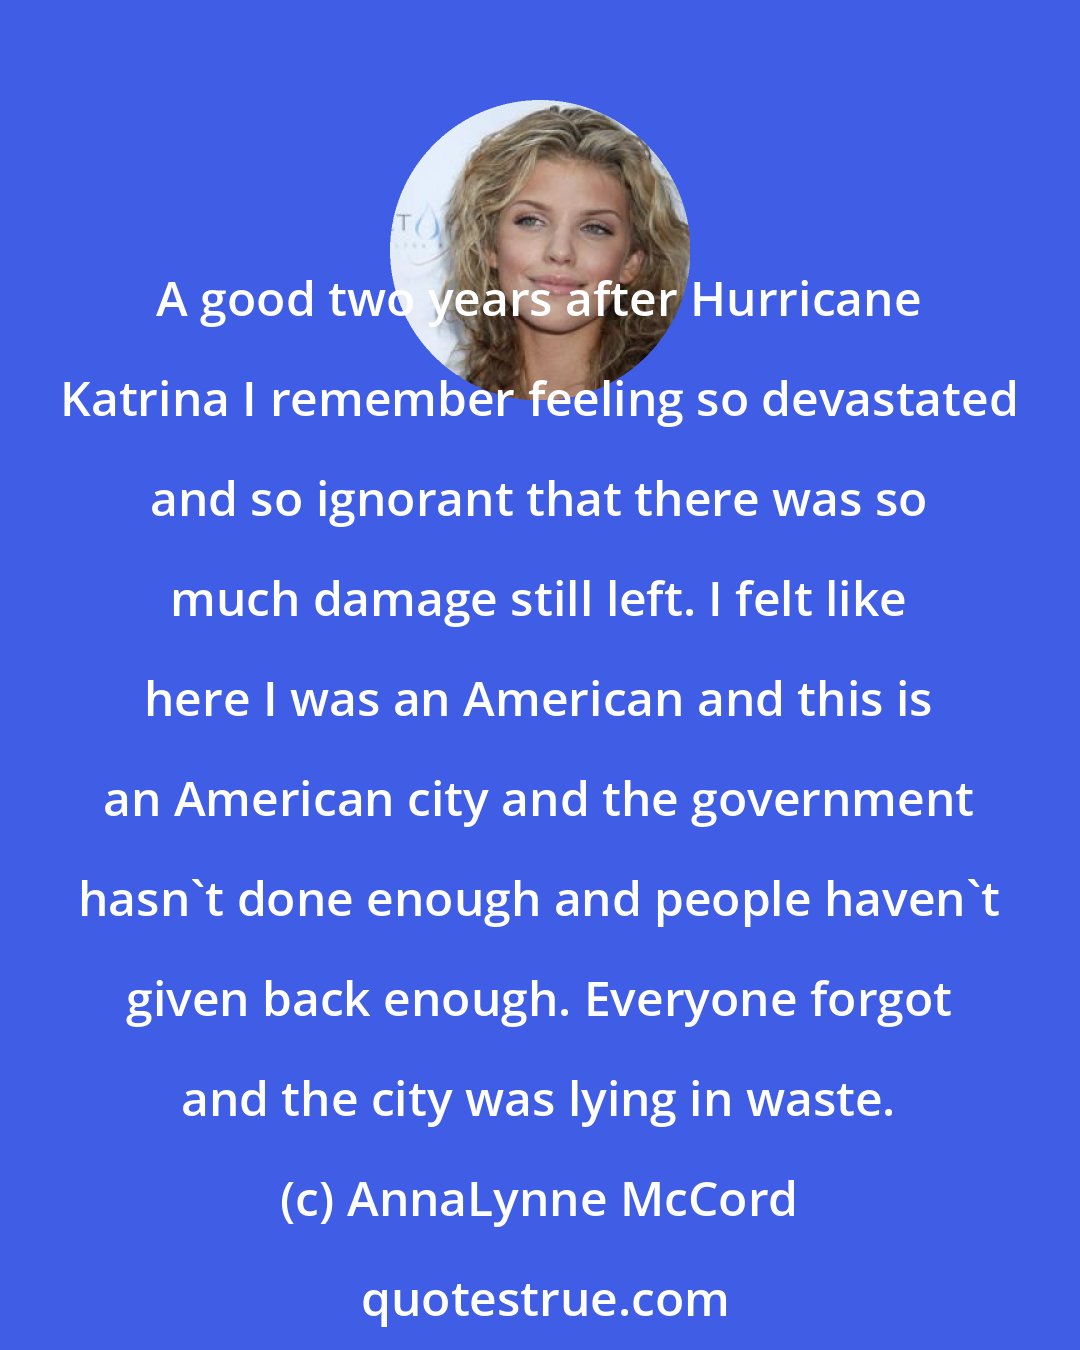 AnnaLynne McCord: A good two years after Hurricane Katrina I remember feeling so devastated and so ignorant that there was so much damage still left. I felt like here I was an American and this is an American city and the government hasn't done enough and people haven't given back enough. Everyone forgot and the city was lying in waste.